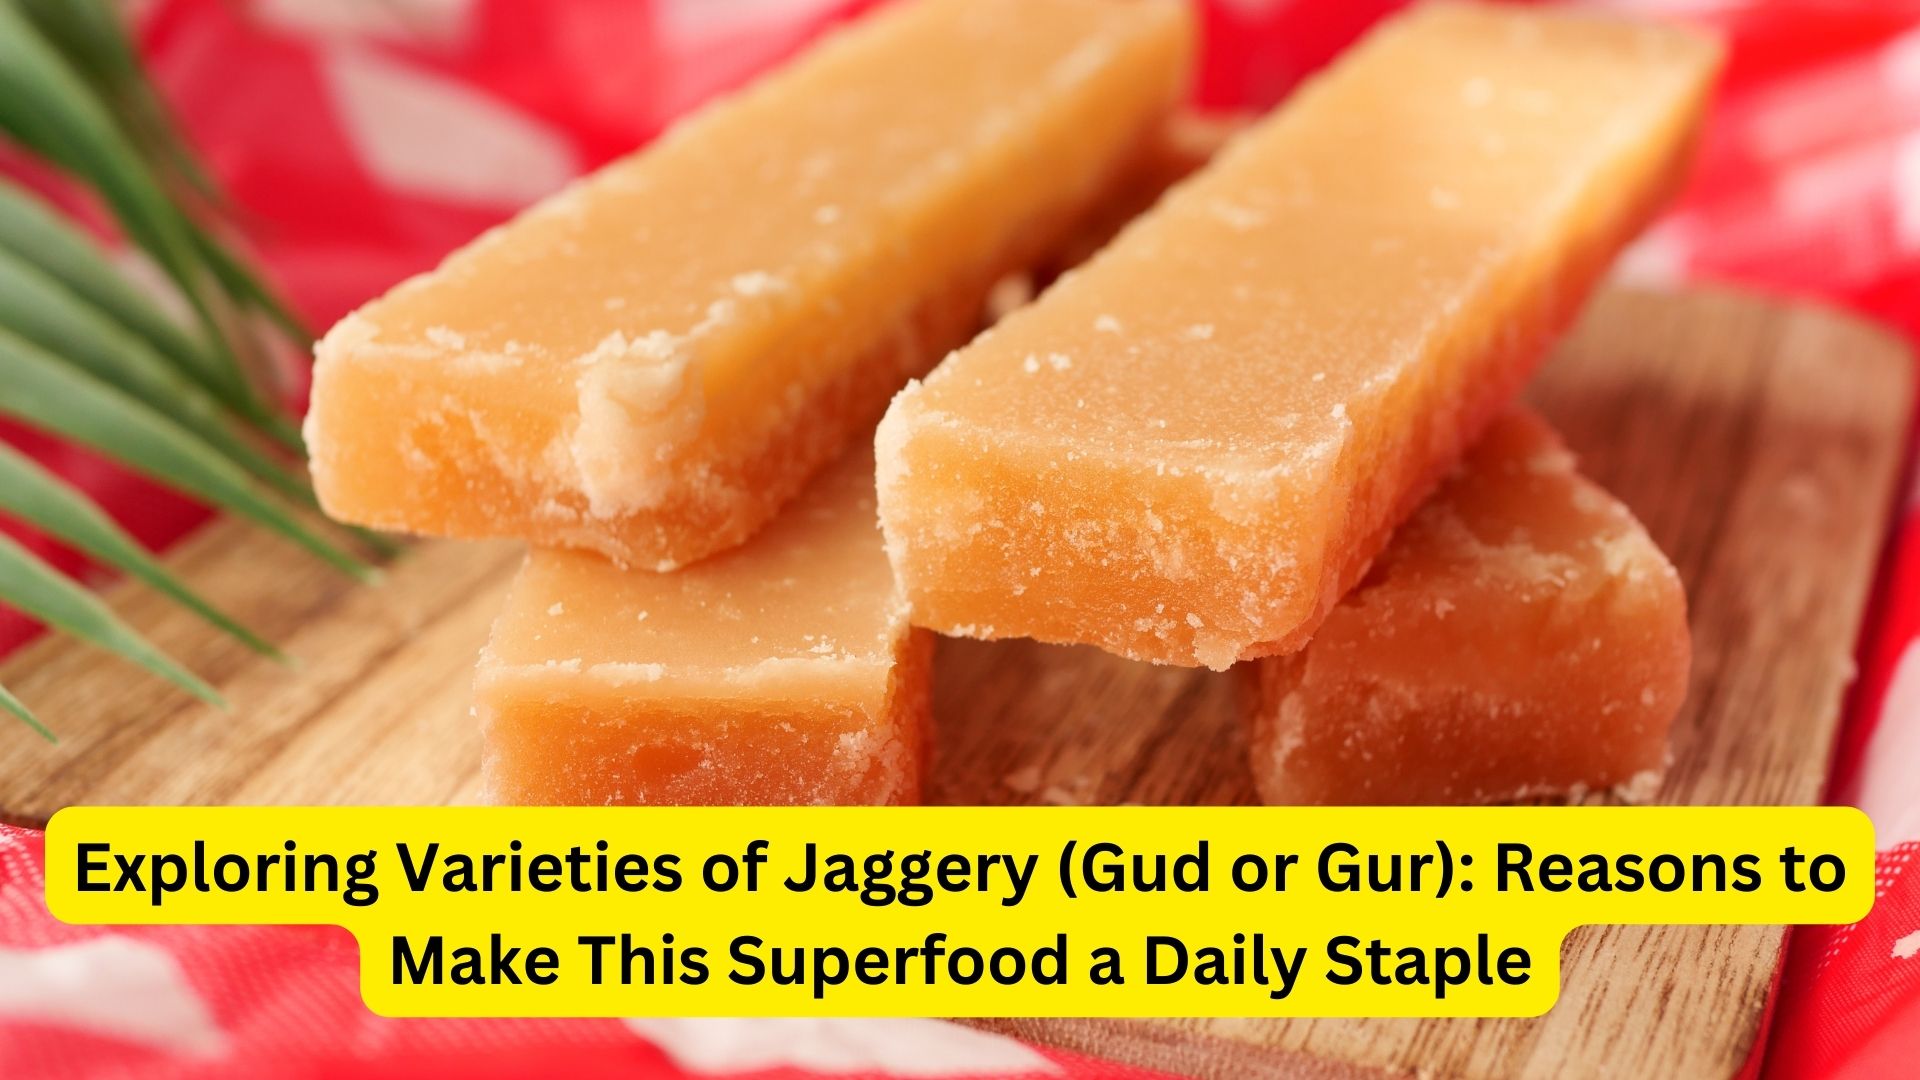 Exploring Varieties of Jaggery (Gud or Gur): Reasons to Make This Superfood a Daily Staple